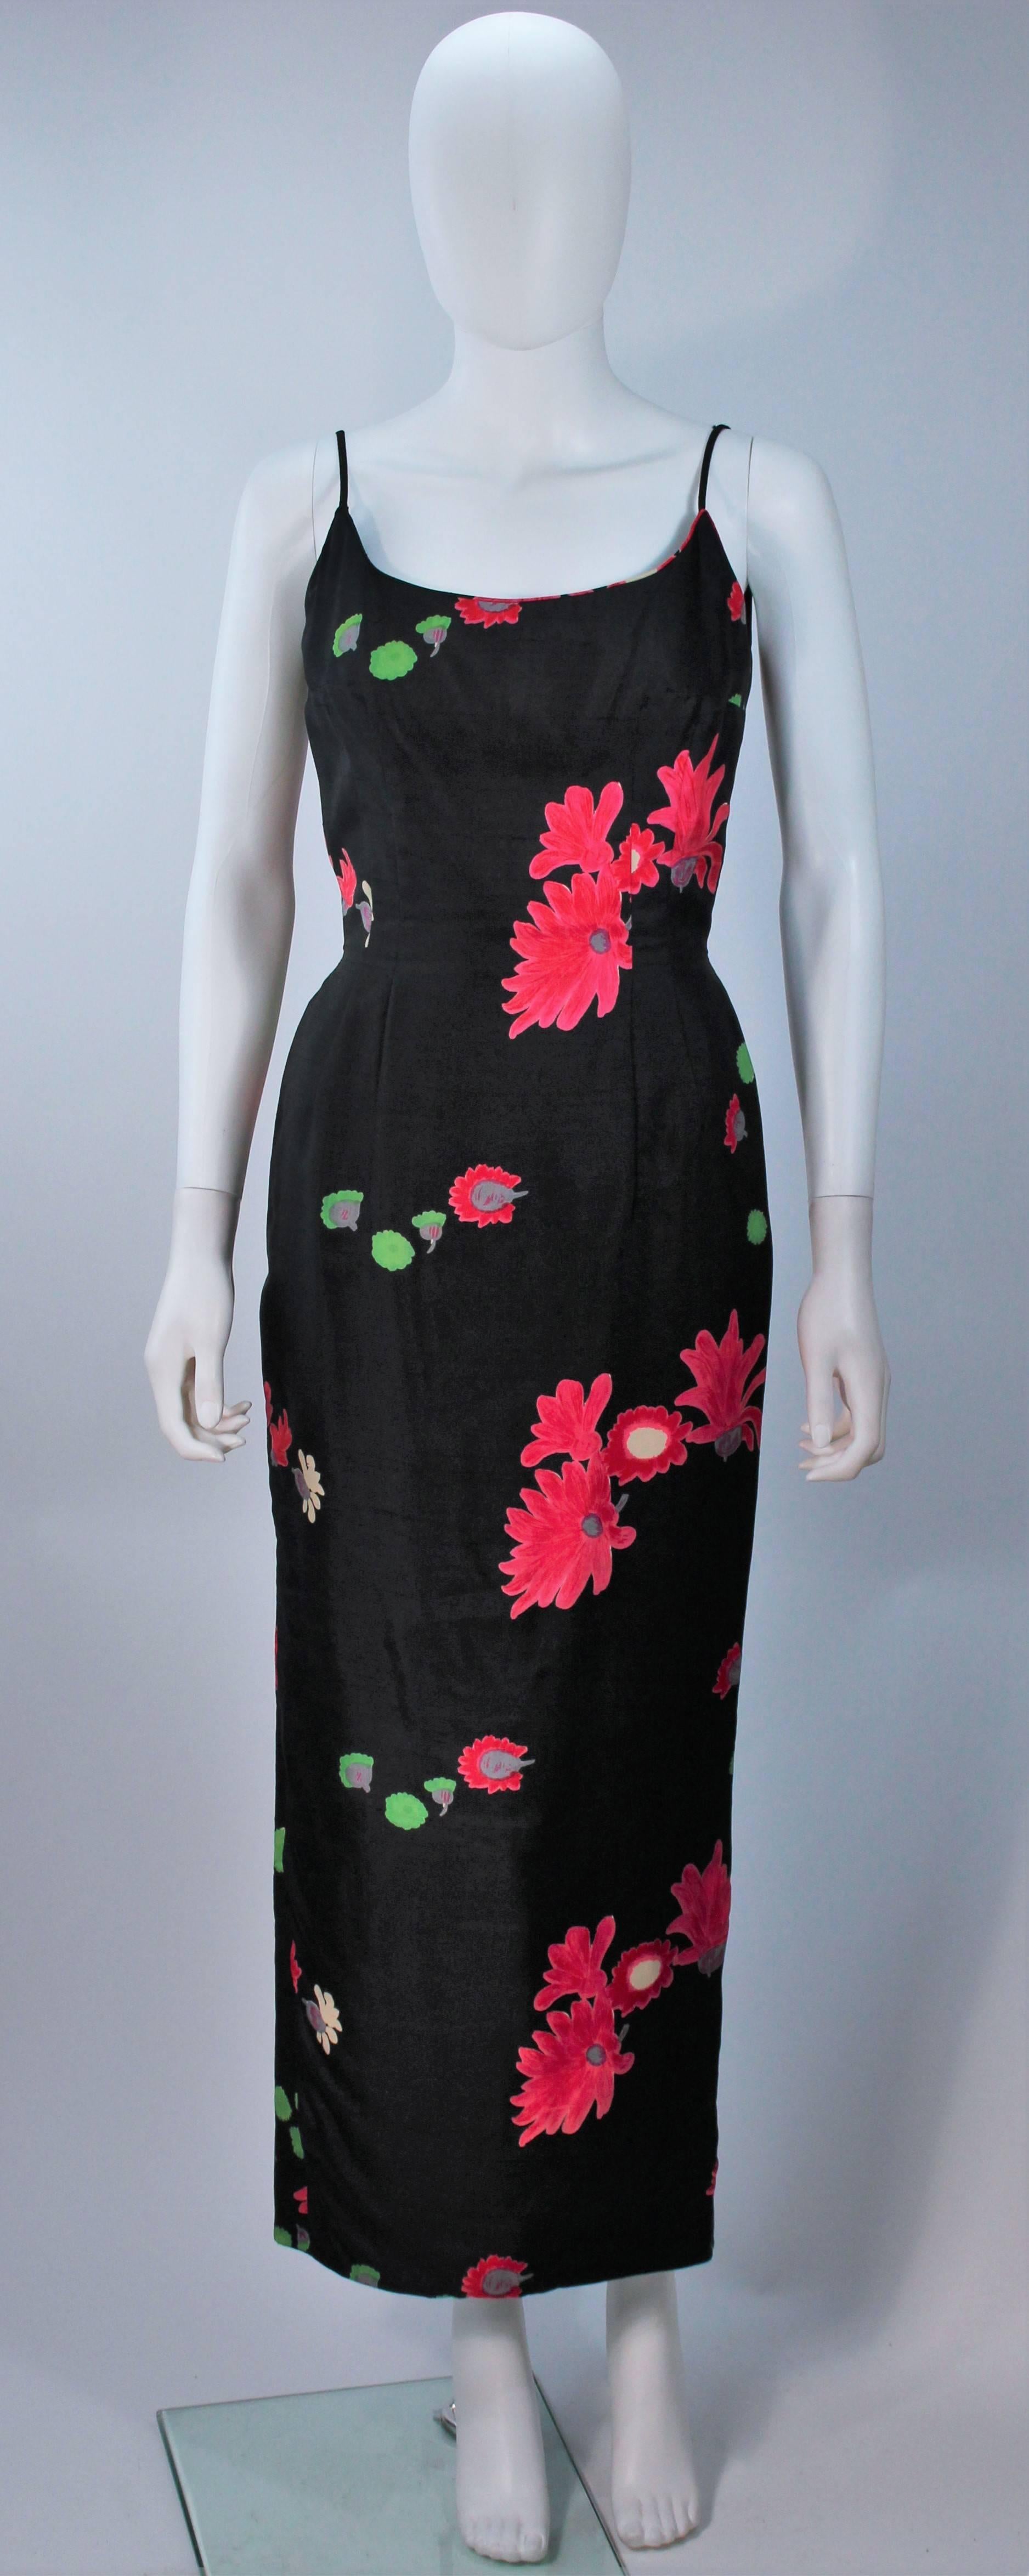  This dress is composed of a floral printed silk. There is a center back zipper closure and bow detail, with pleated hem. In excellent vintage condition. 

  **Please cross-reference measurements for personal accuracy. Size in description box is